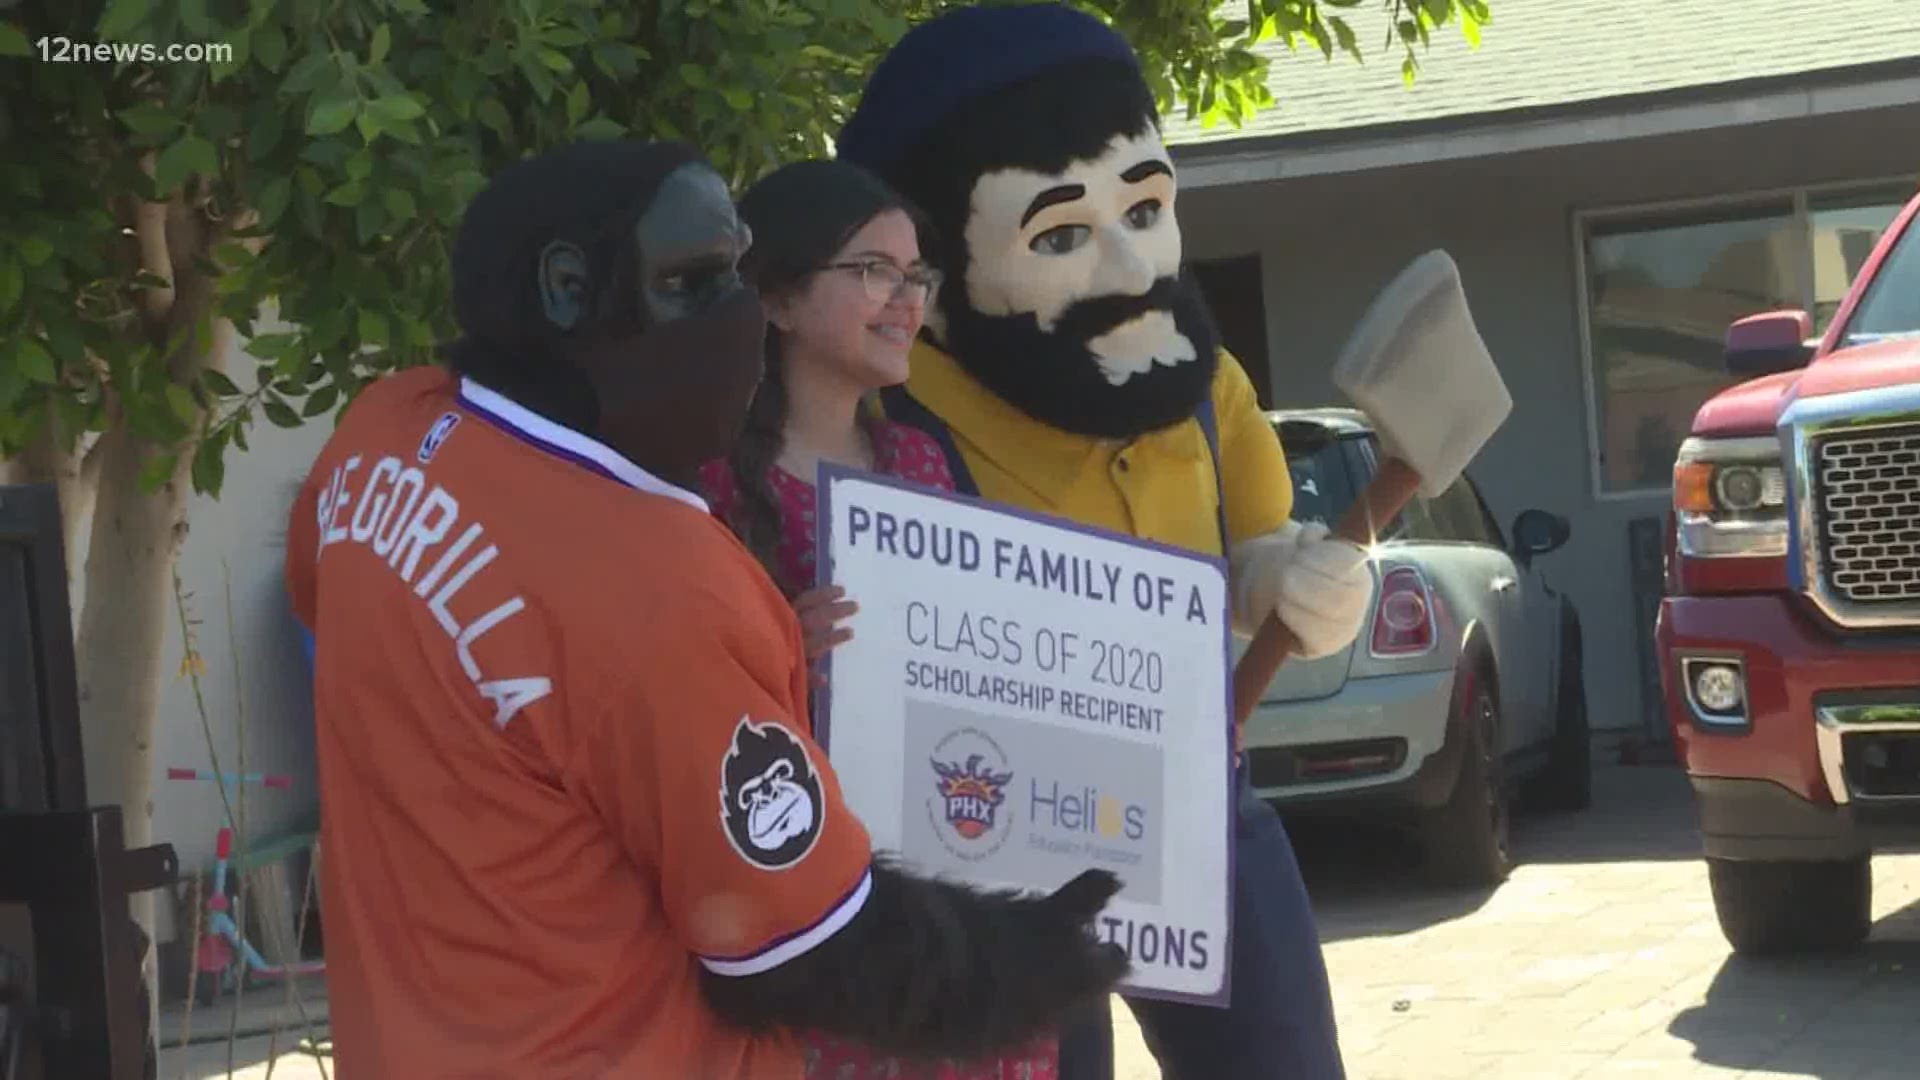 A Carl Harden High School senior thought she was interviewing for a scholarship this morning. But, the Phoenix Suns had a surprise up their sleeve!